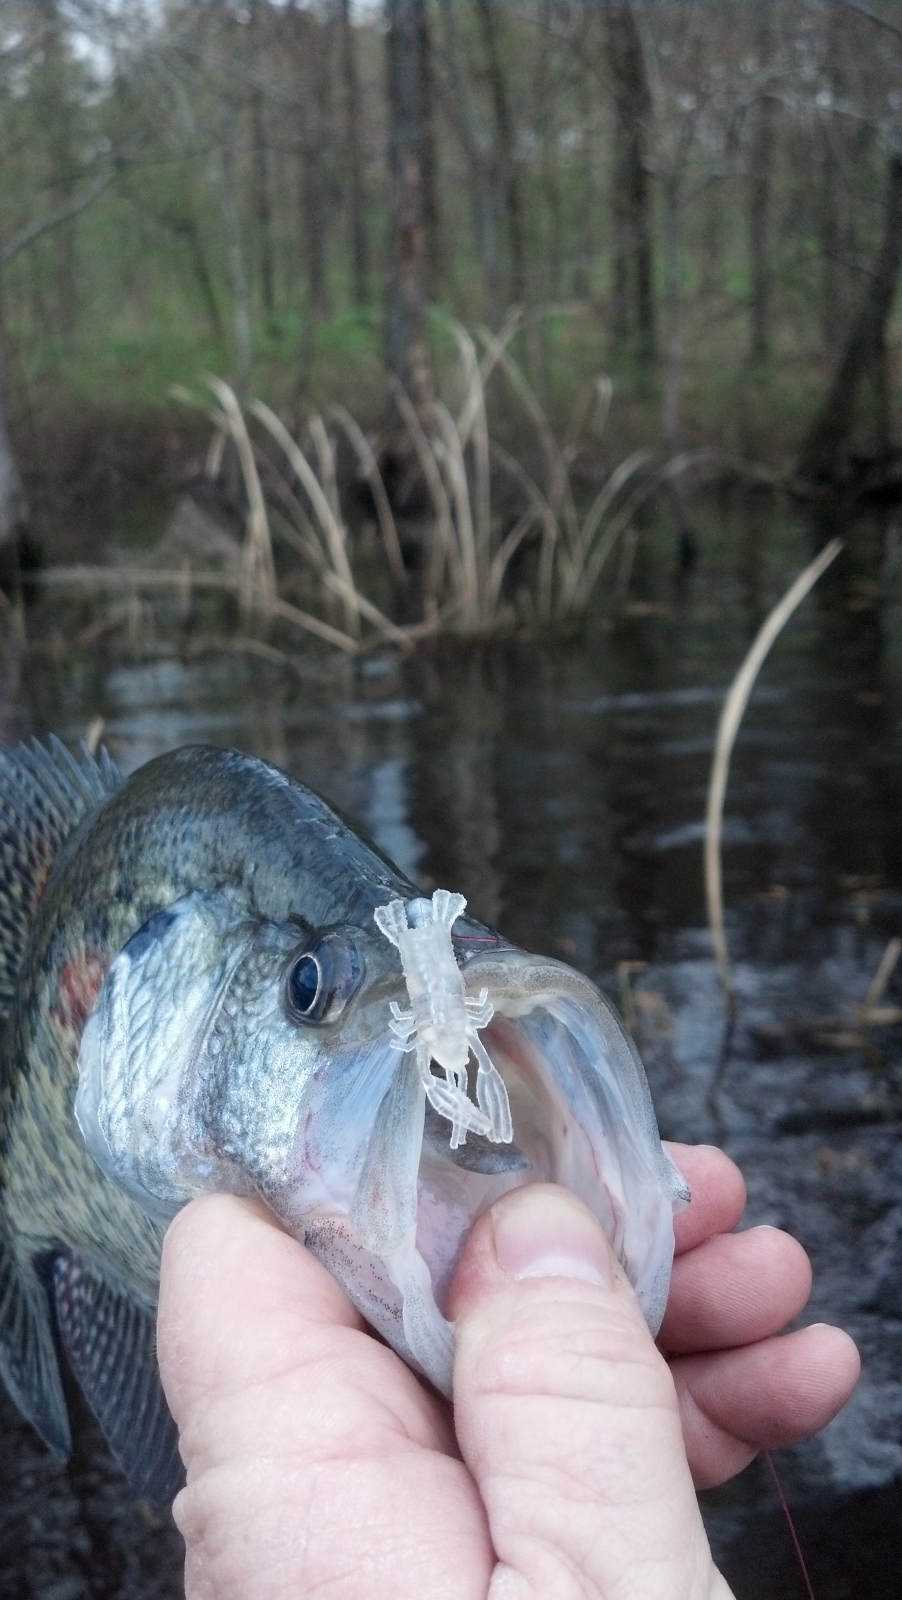 Crappie Caught by John with Mister Twister 1¼ Micro Crawfish™ in Arkansas